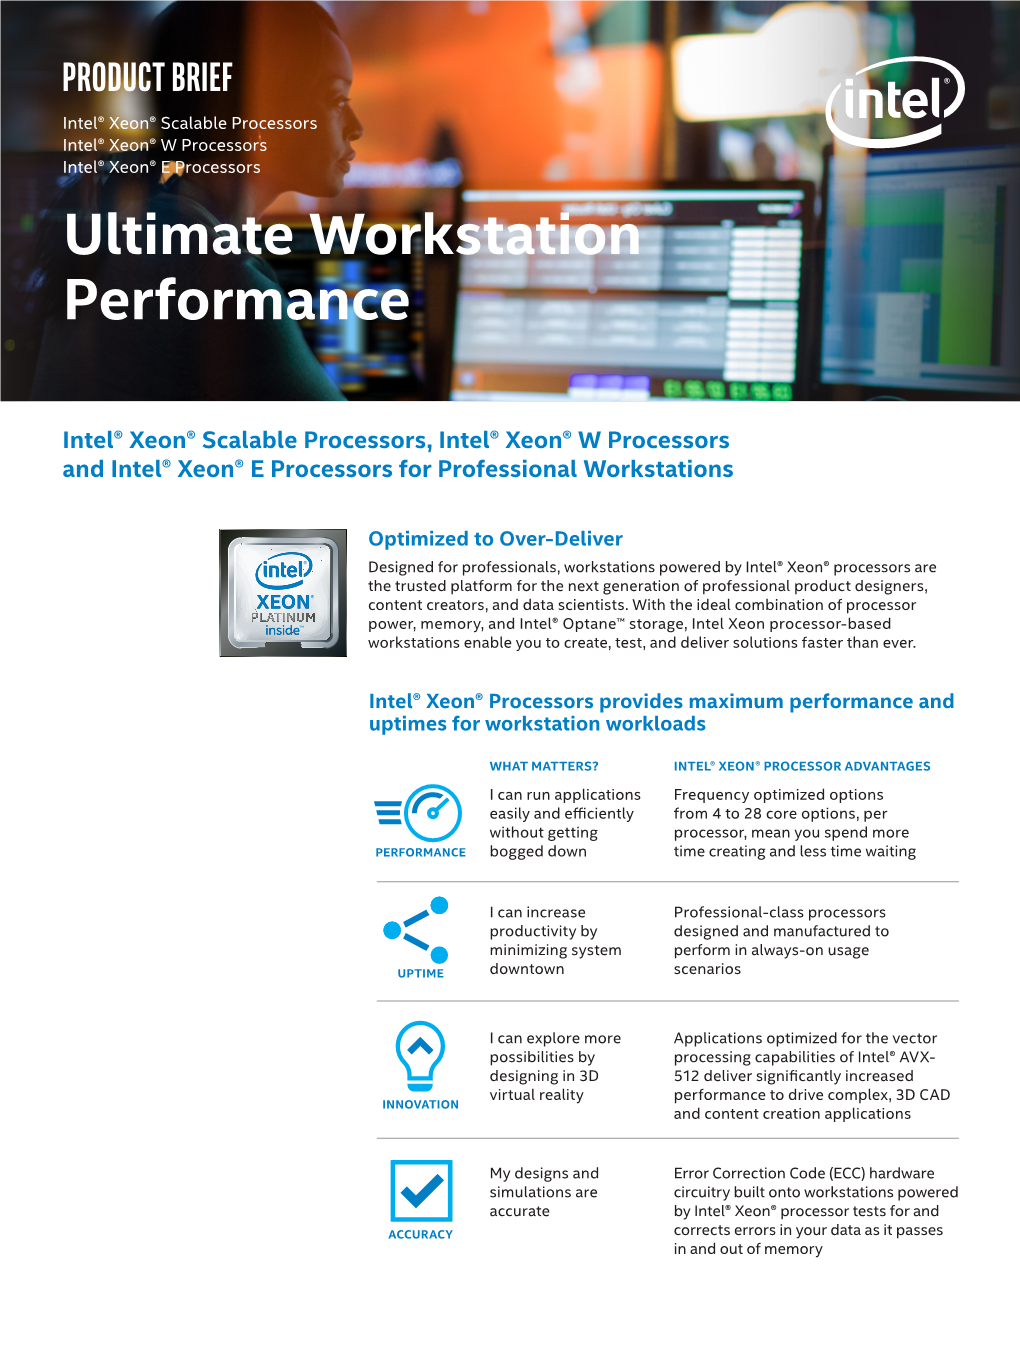 Ultimate Workstation Performance with Intel® Xeon® Processors